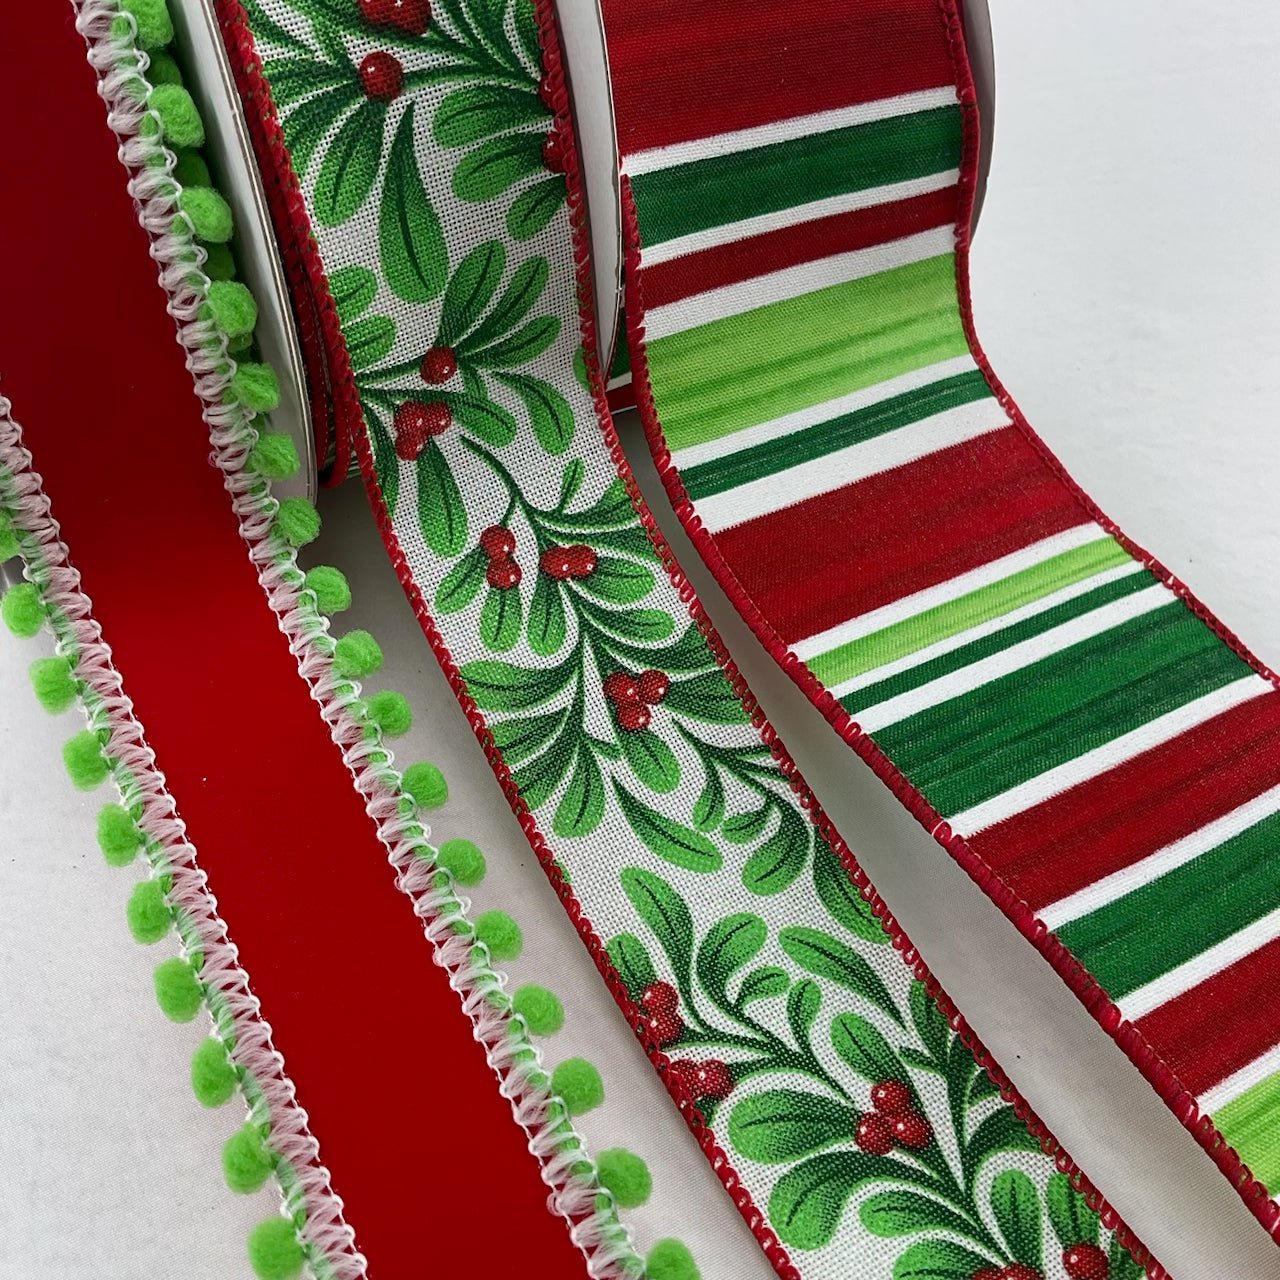 Holly red and green bow bundle wired ribbon x 3 rolls (40 yards total) please read description - Greenery MarketRibbons & TrimLimehollyx3